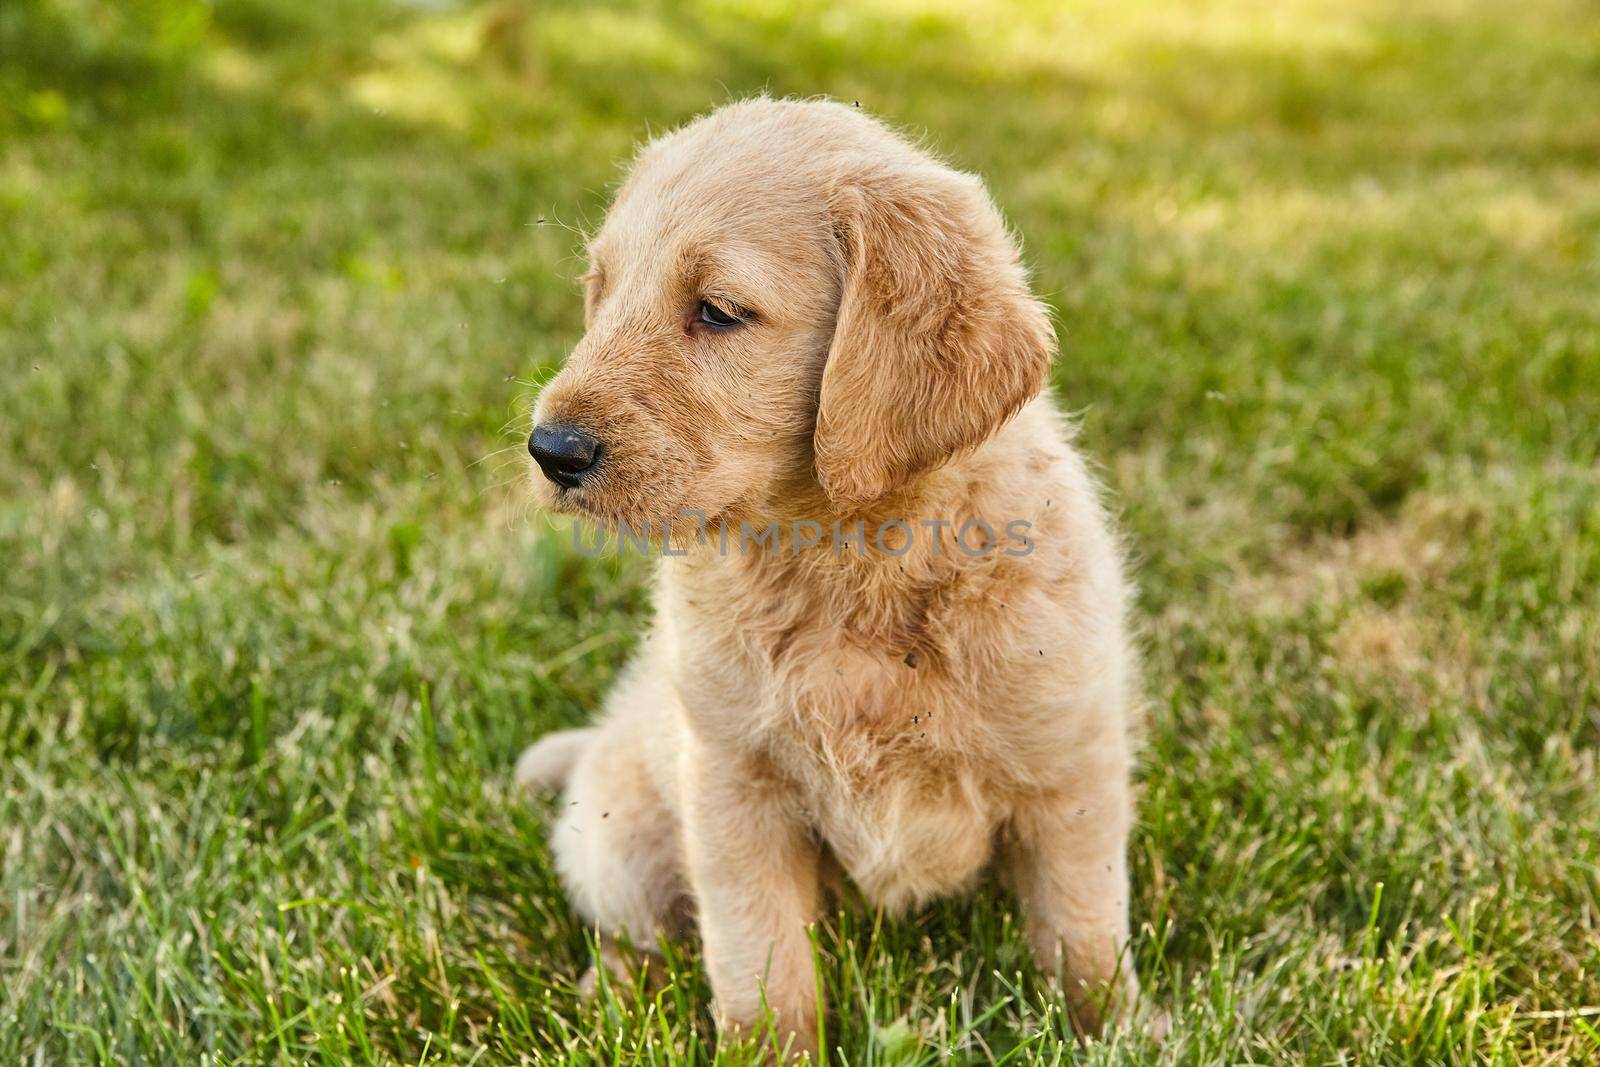 Cute Labradoodle puppy sitting in grass by njproductions